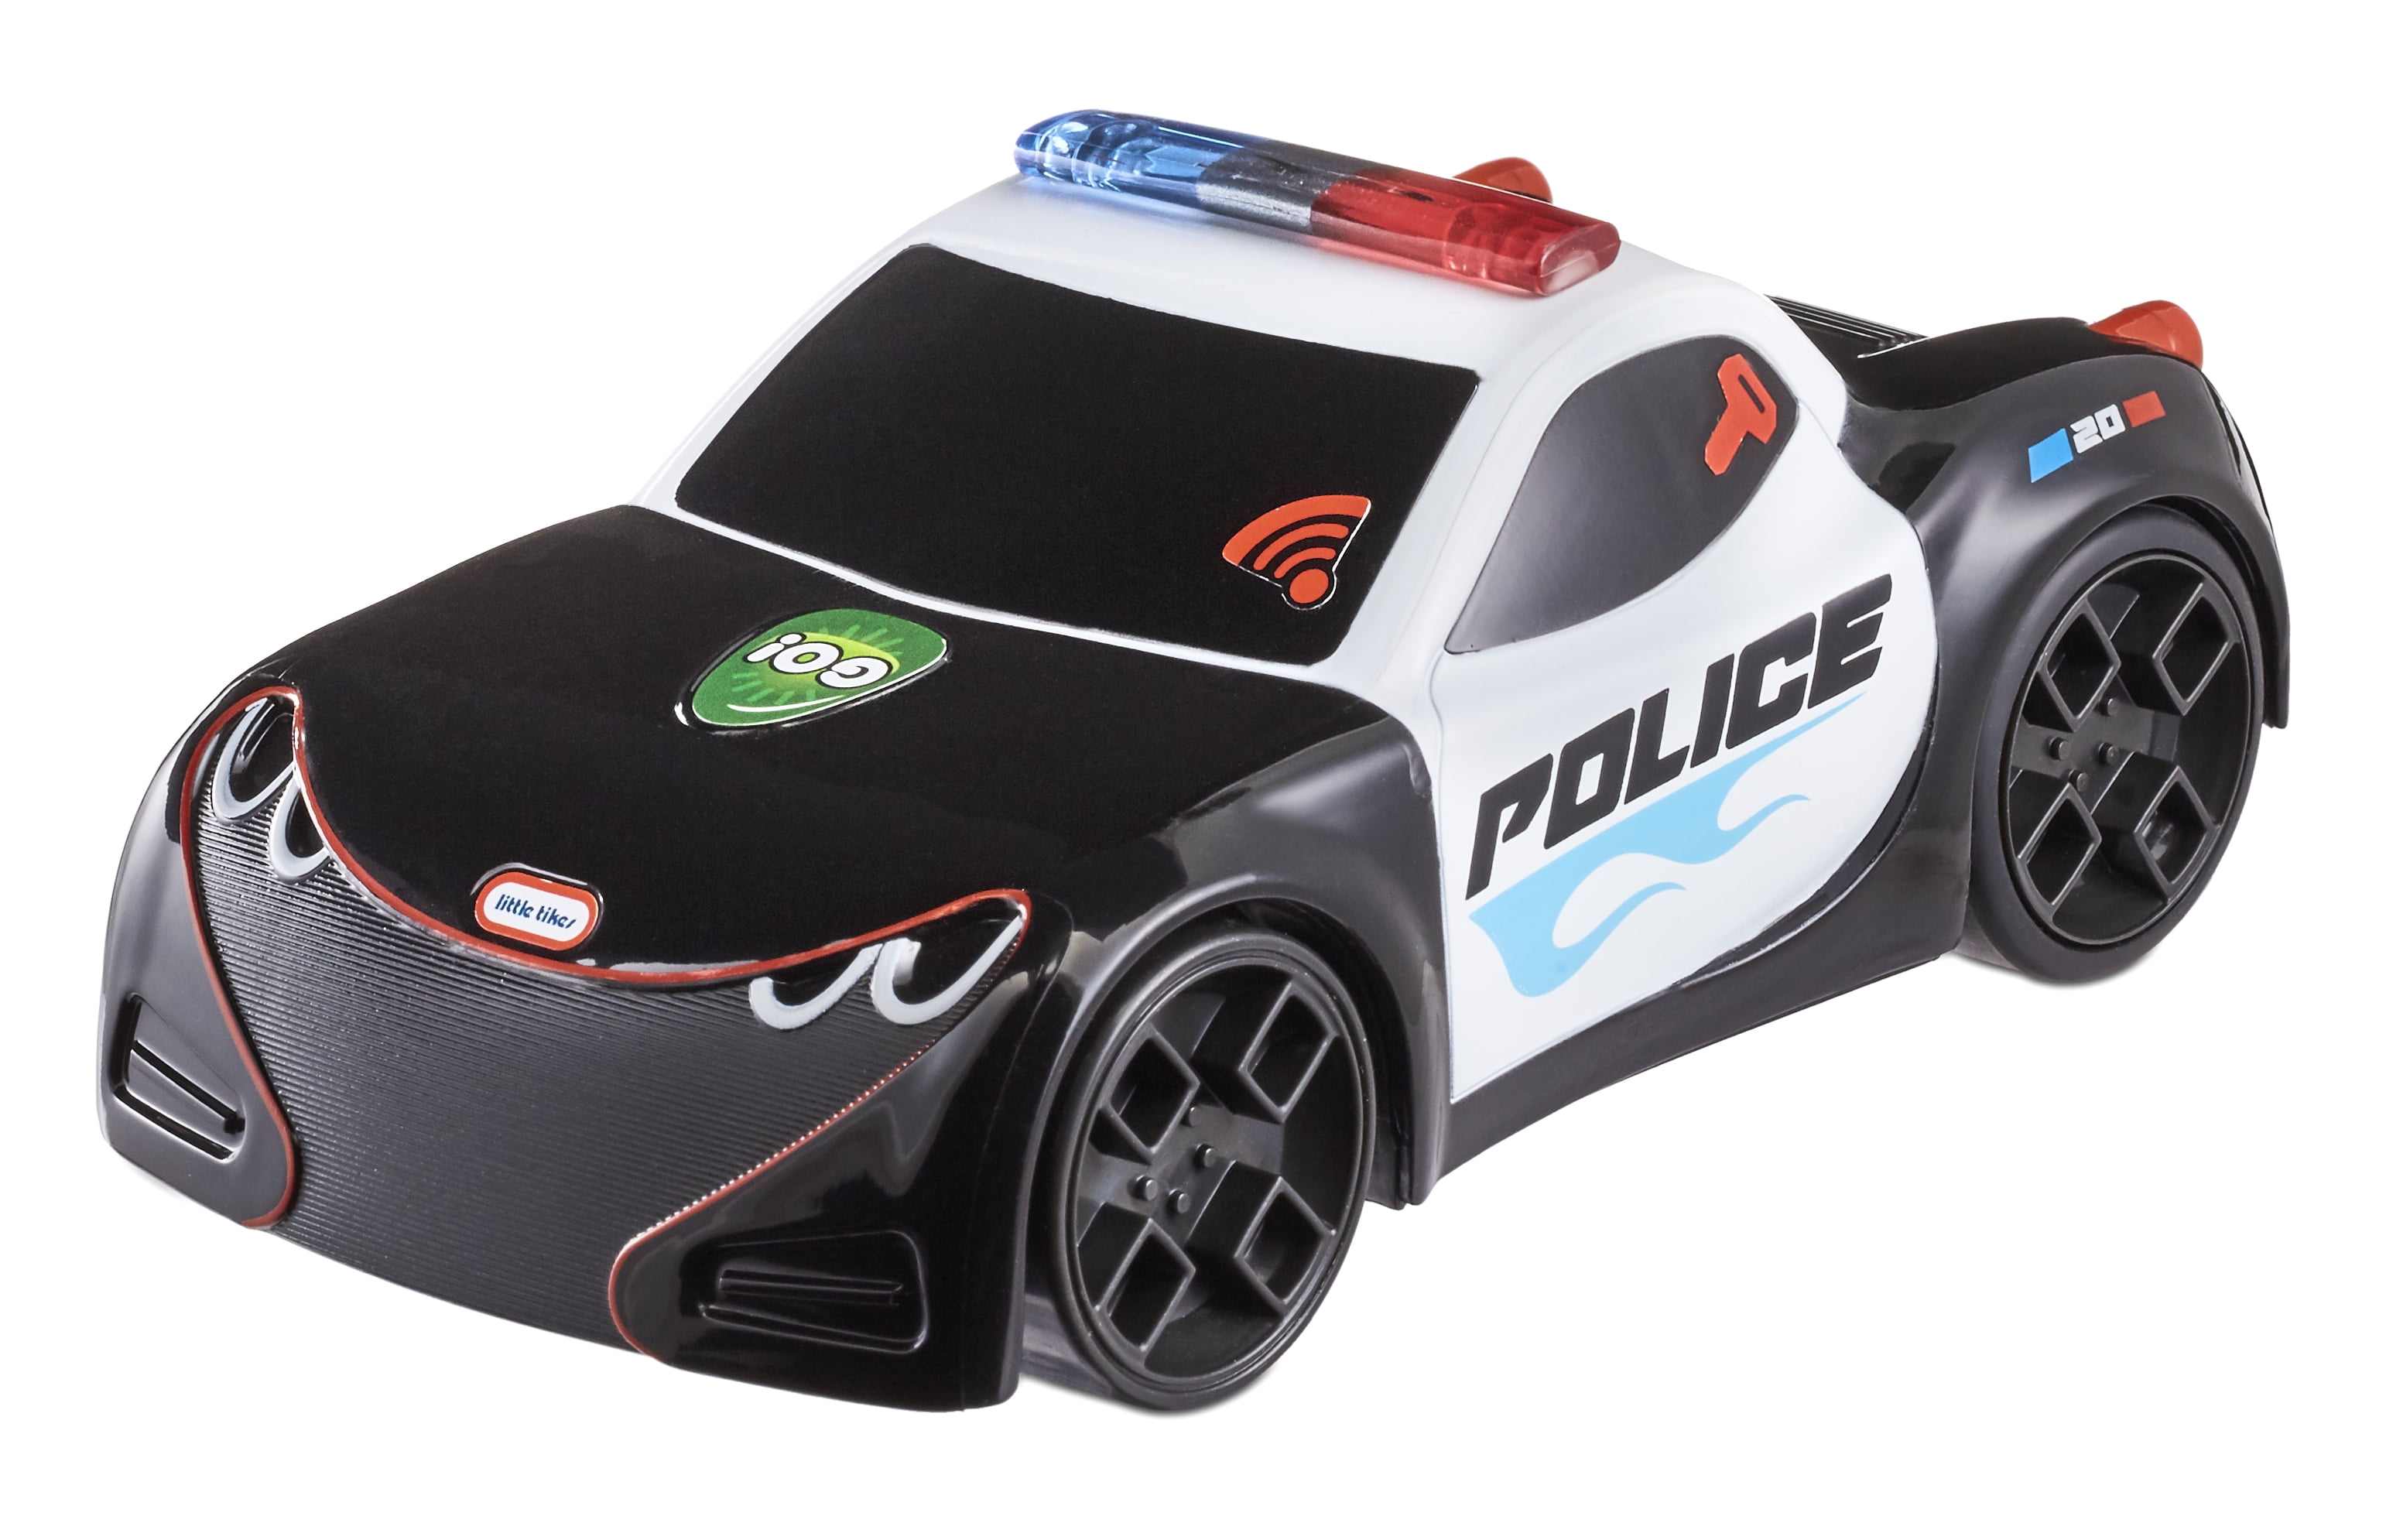 Tikes Touch 'N' Go Racers - Police Car Toy for Kids - Walmart.com